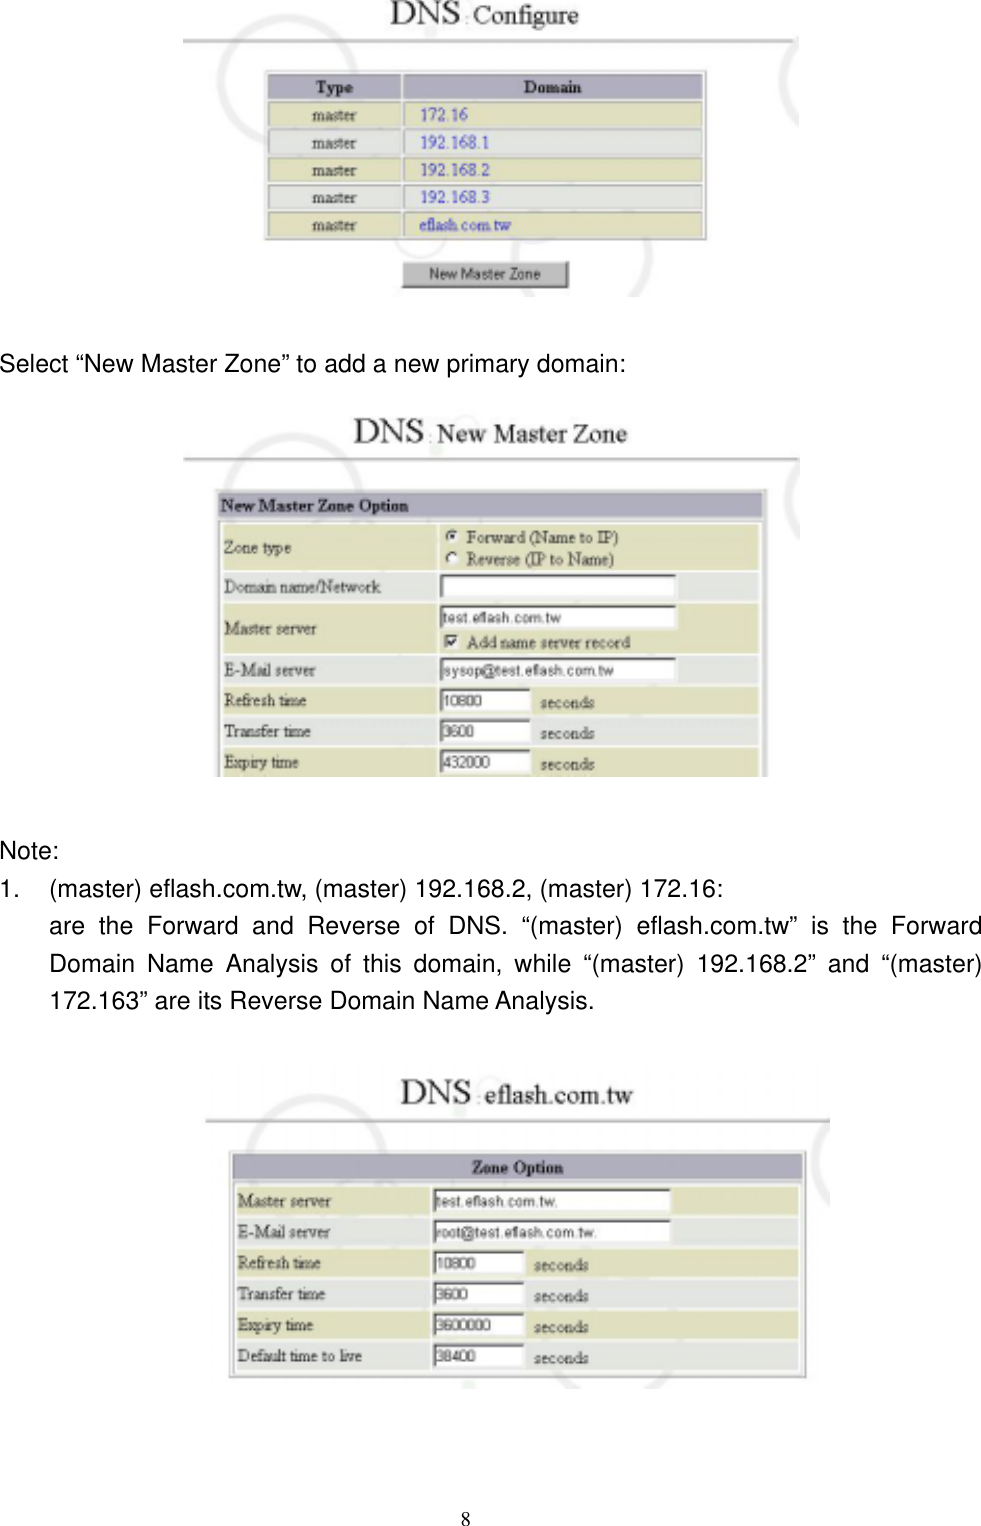  8  Select “New Master Zone” to add a new primary domain:   Note: 1.  (master) eflash.com.tw, (master) 192.168.2, (master) 172.16: are the Forward and Reverse of DNS. “(master) eflash.com.tw” is the Forward Domain Name Analysis of this domain, while “(master) 192.168.2” and “(master) 172.163” are its Reverse Domain Name Analysis.  